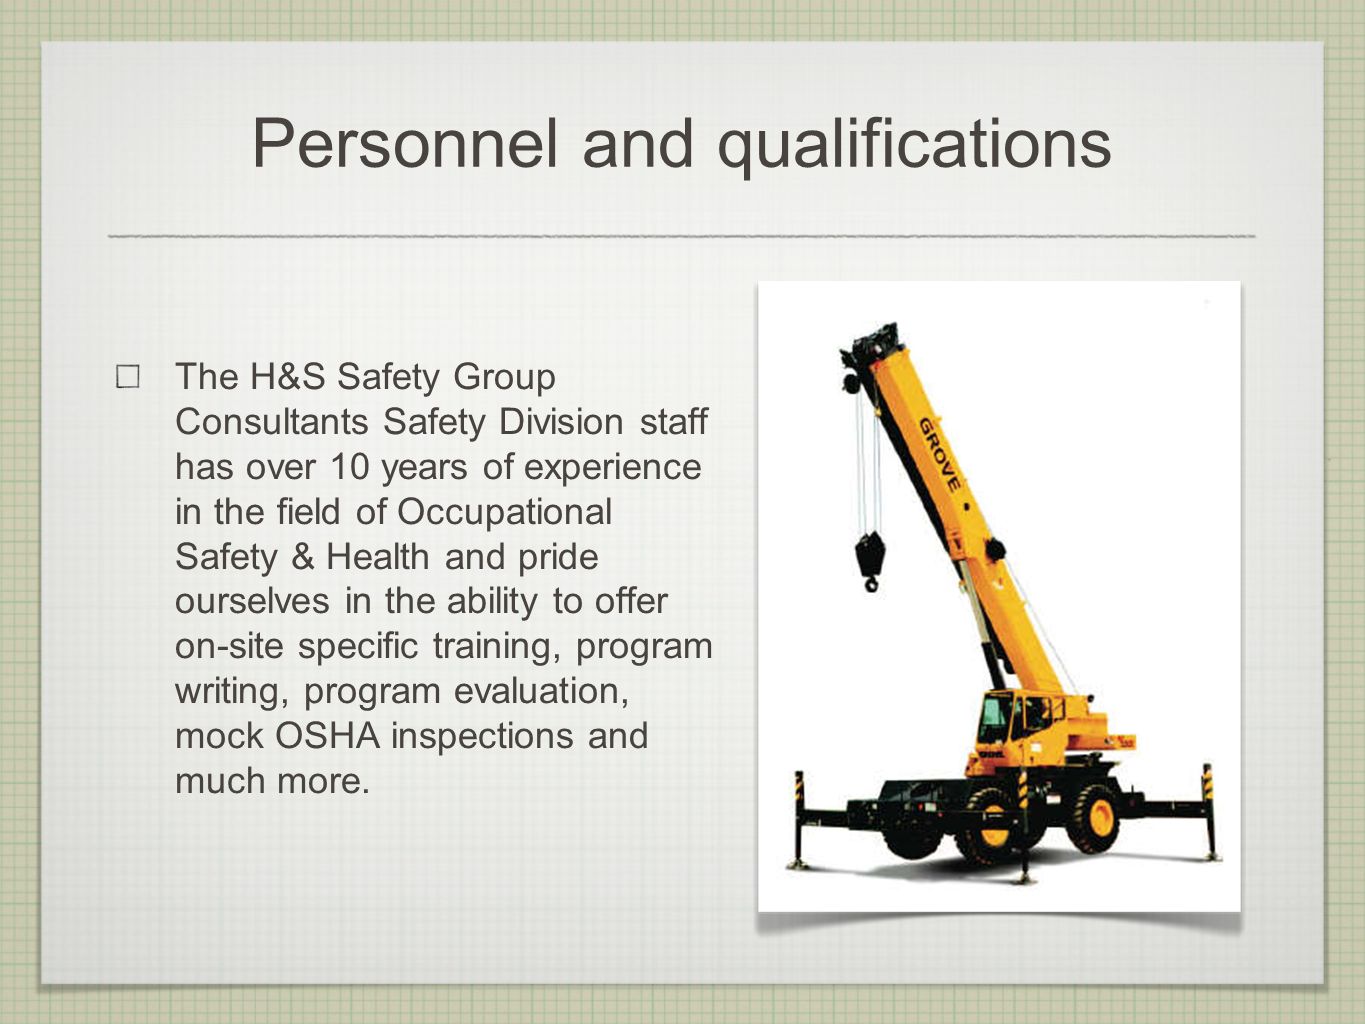 Personnel and qualifications The H&S Safety Group Consultants Safety Division staff has over 10 years of experience in the field of Occupational Safety & Health and pride ourselves in the ability to offer on-site specific training, program writing, program evaluation, mock OSHA inspections and much more.